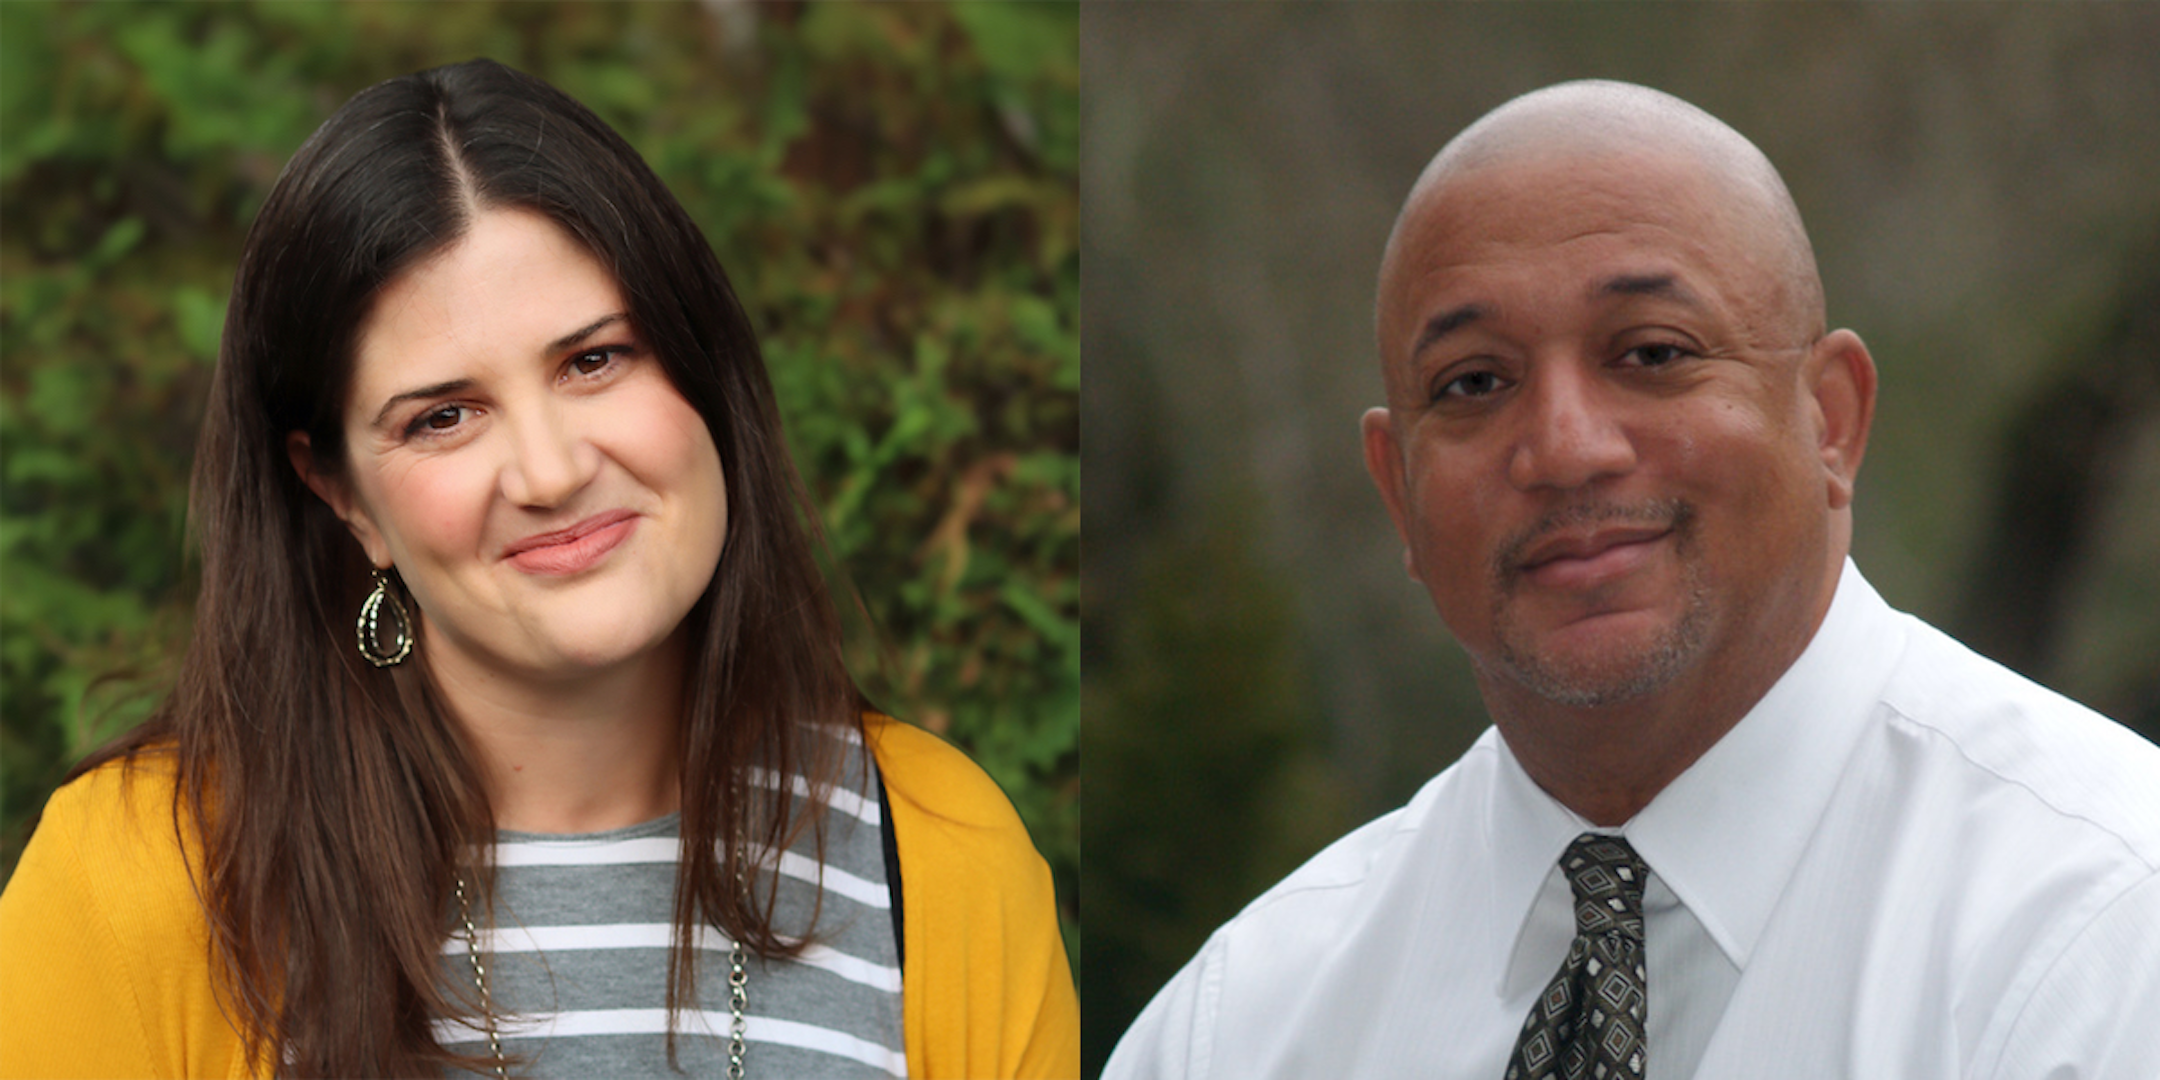 Jessie DuBose (left) and D.L. Richardson (right) join the FBO Board of Directors.